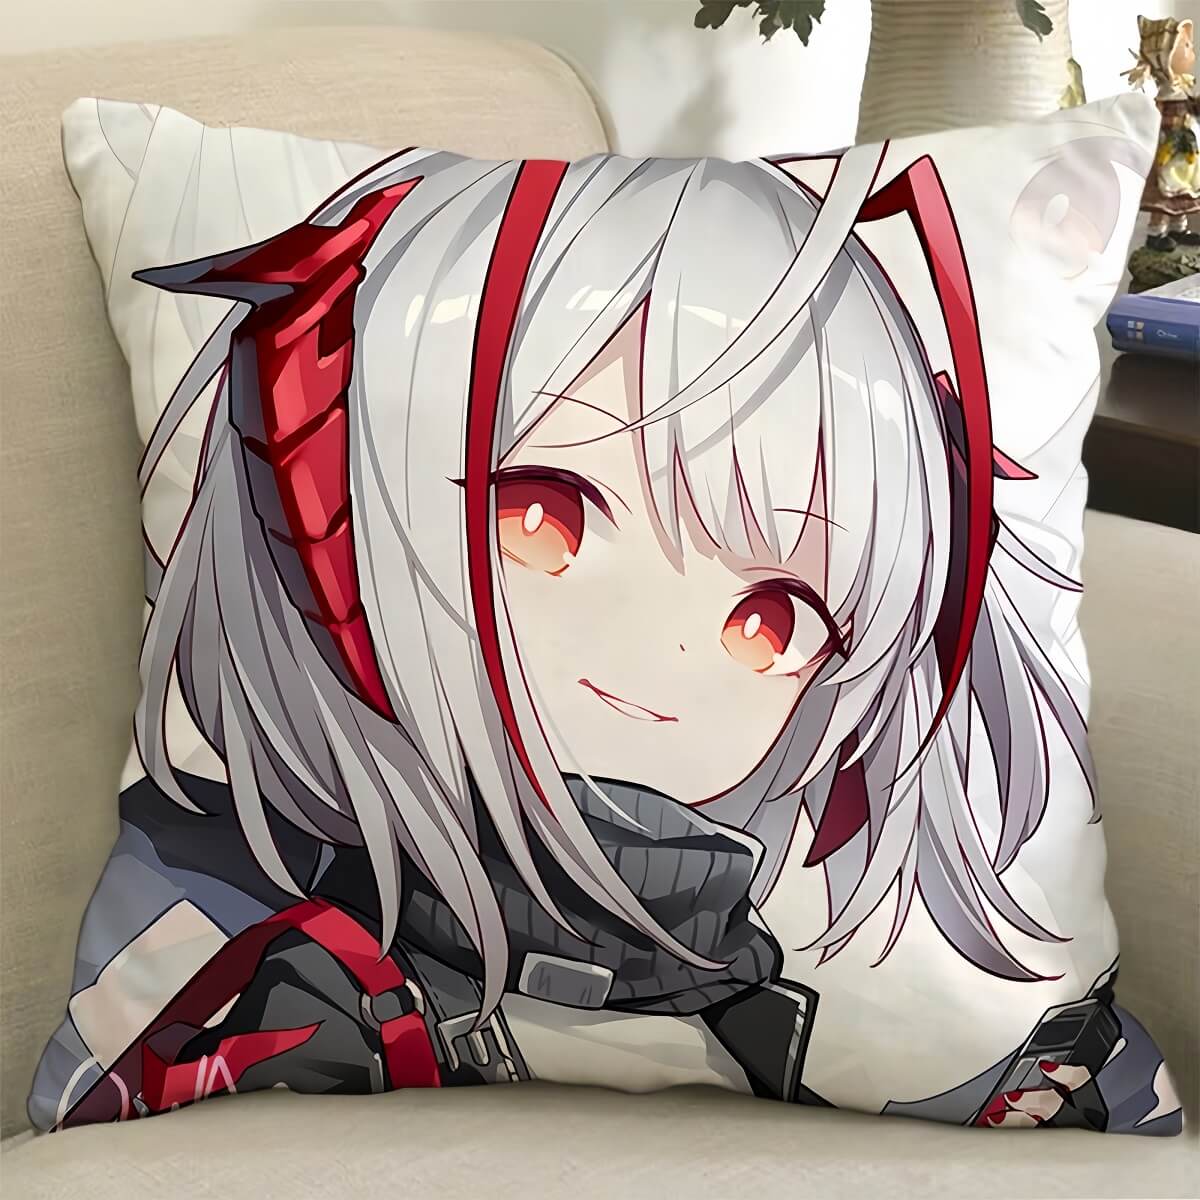 Arknights W pillow